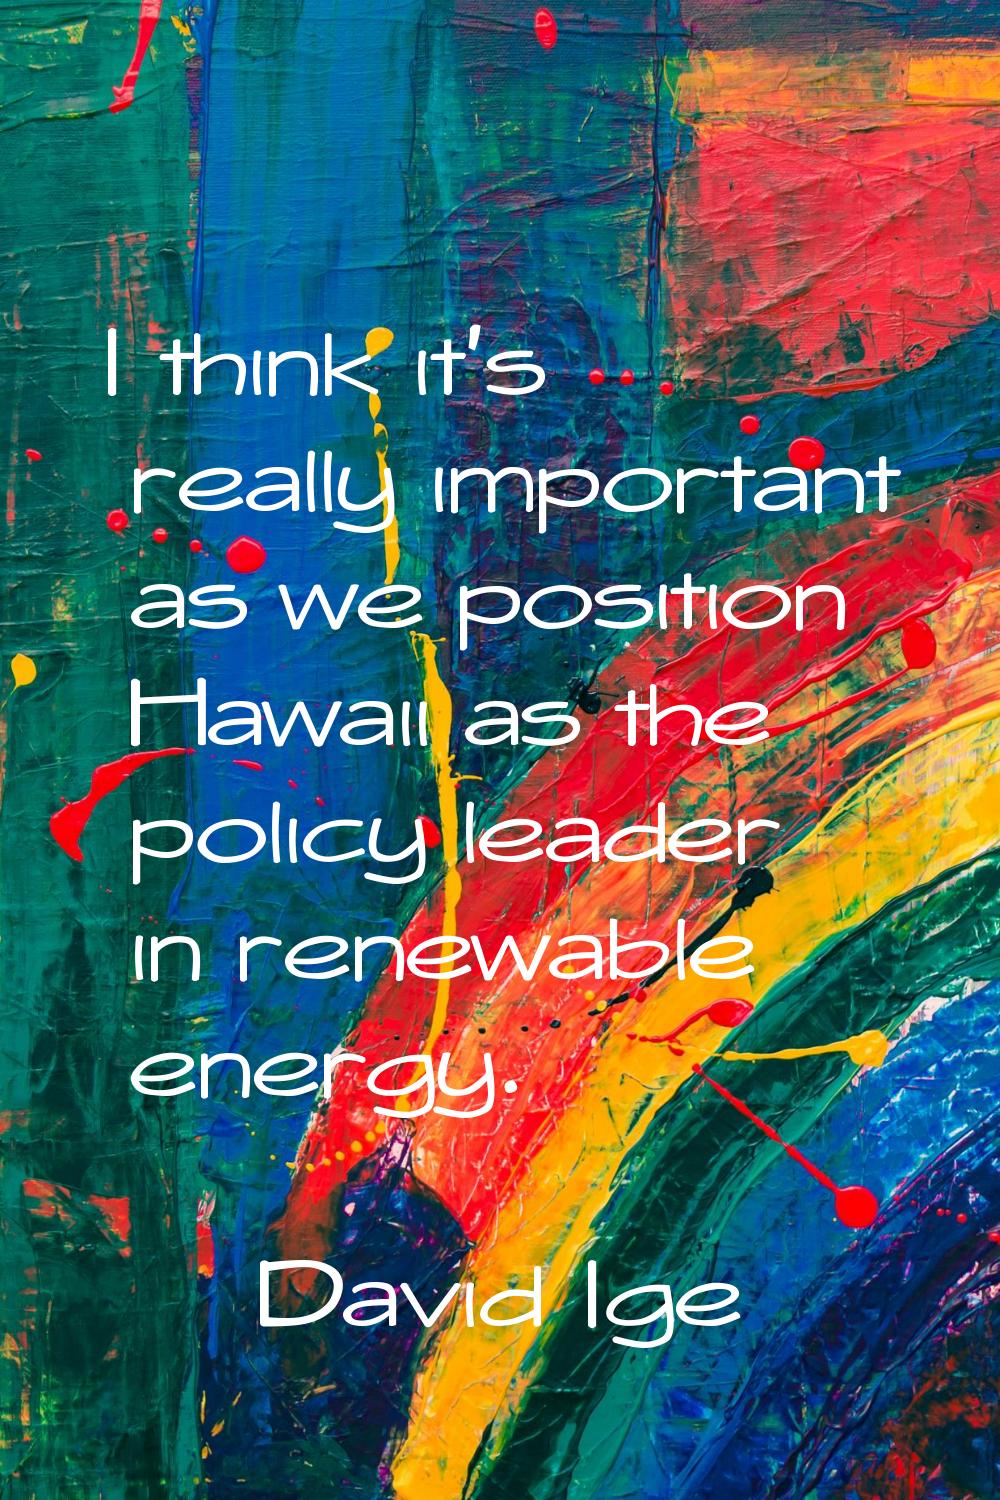 I think it's really important as we position Hawaii as the policy leader in renewable energy.